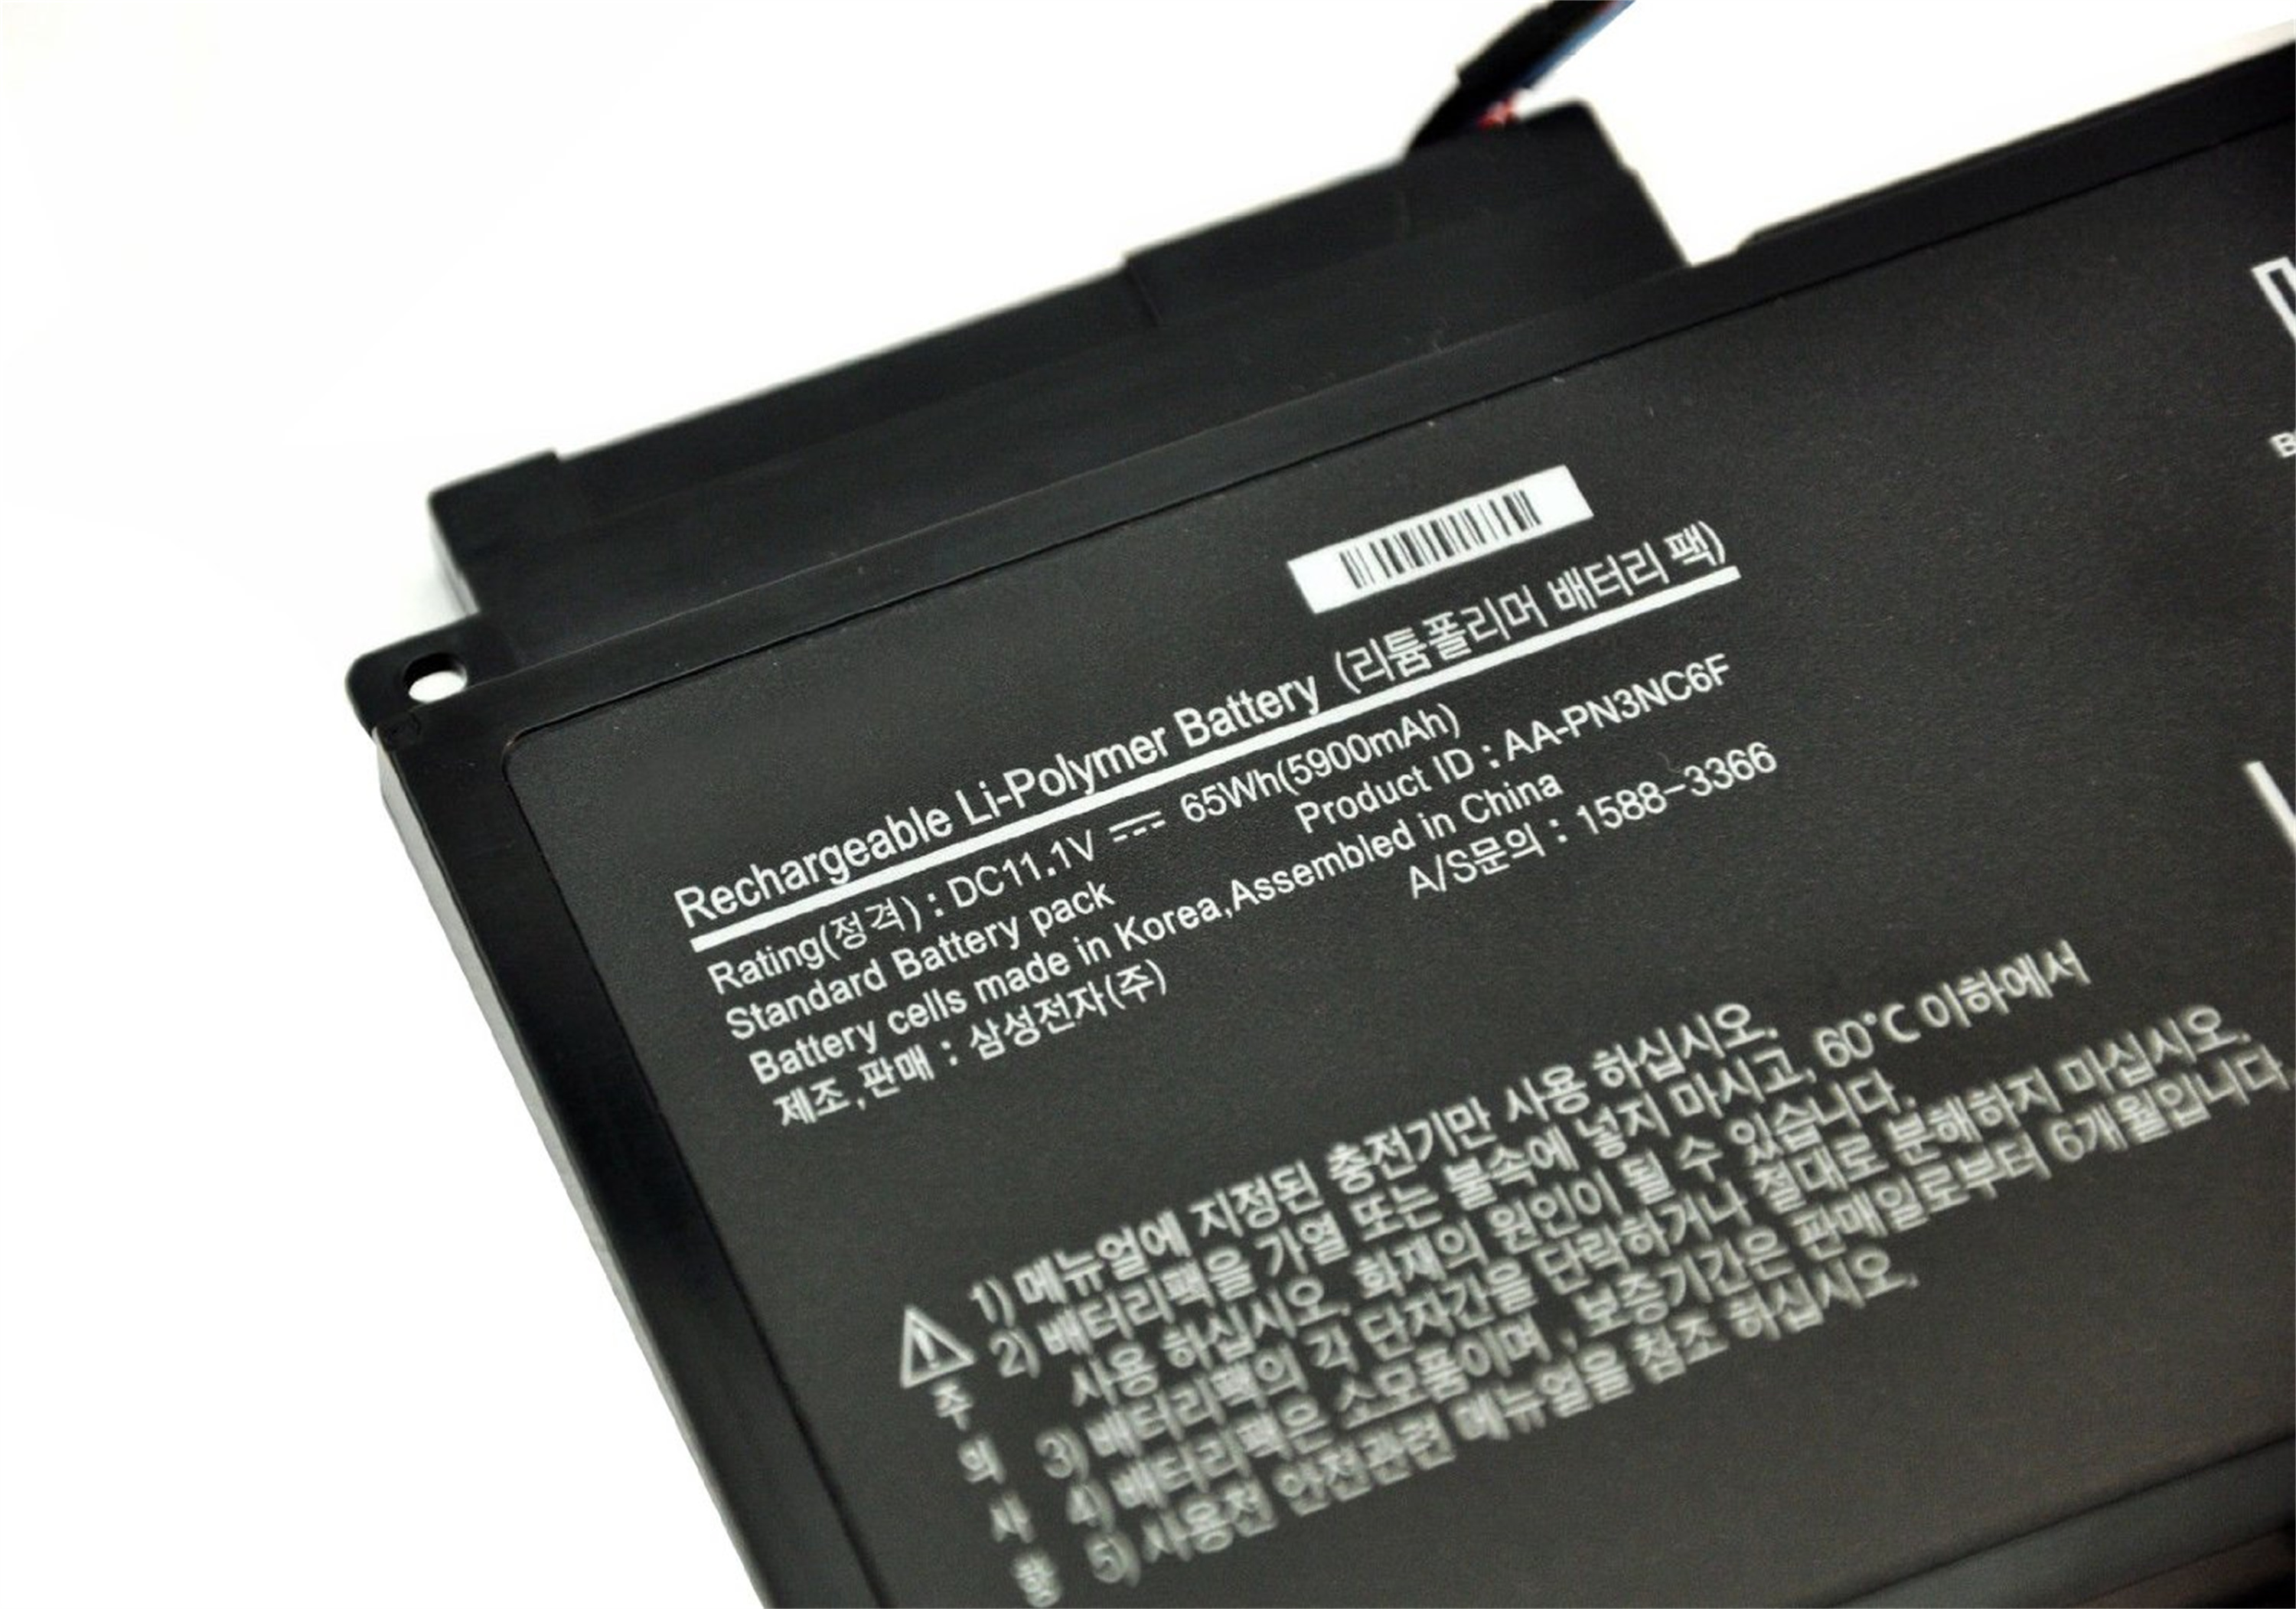 AA-PN3NC6F rechargeable lithium ion Notebook battery Laptop battery Portege Samsung SF310 Samsung SF410 Samsung SF510 Samsung QX310 Samsung QX410 Samsung QX411 Samsung QX510 11.1V 5900mAh